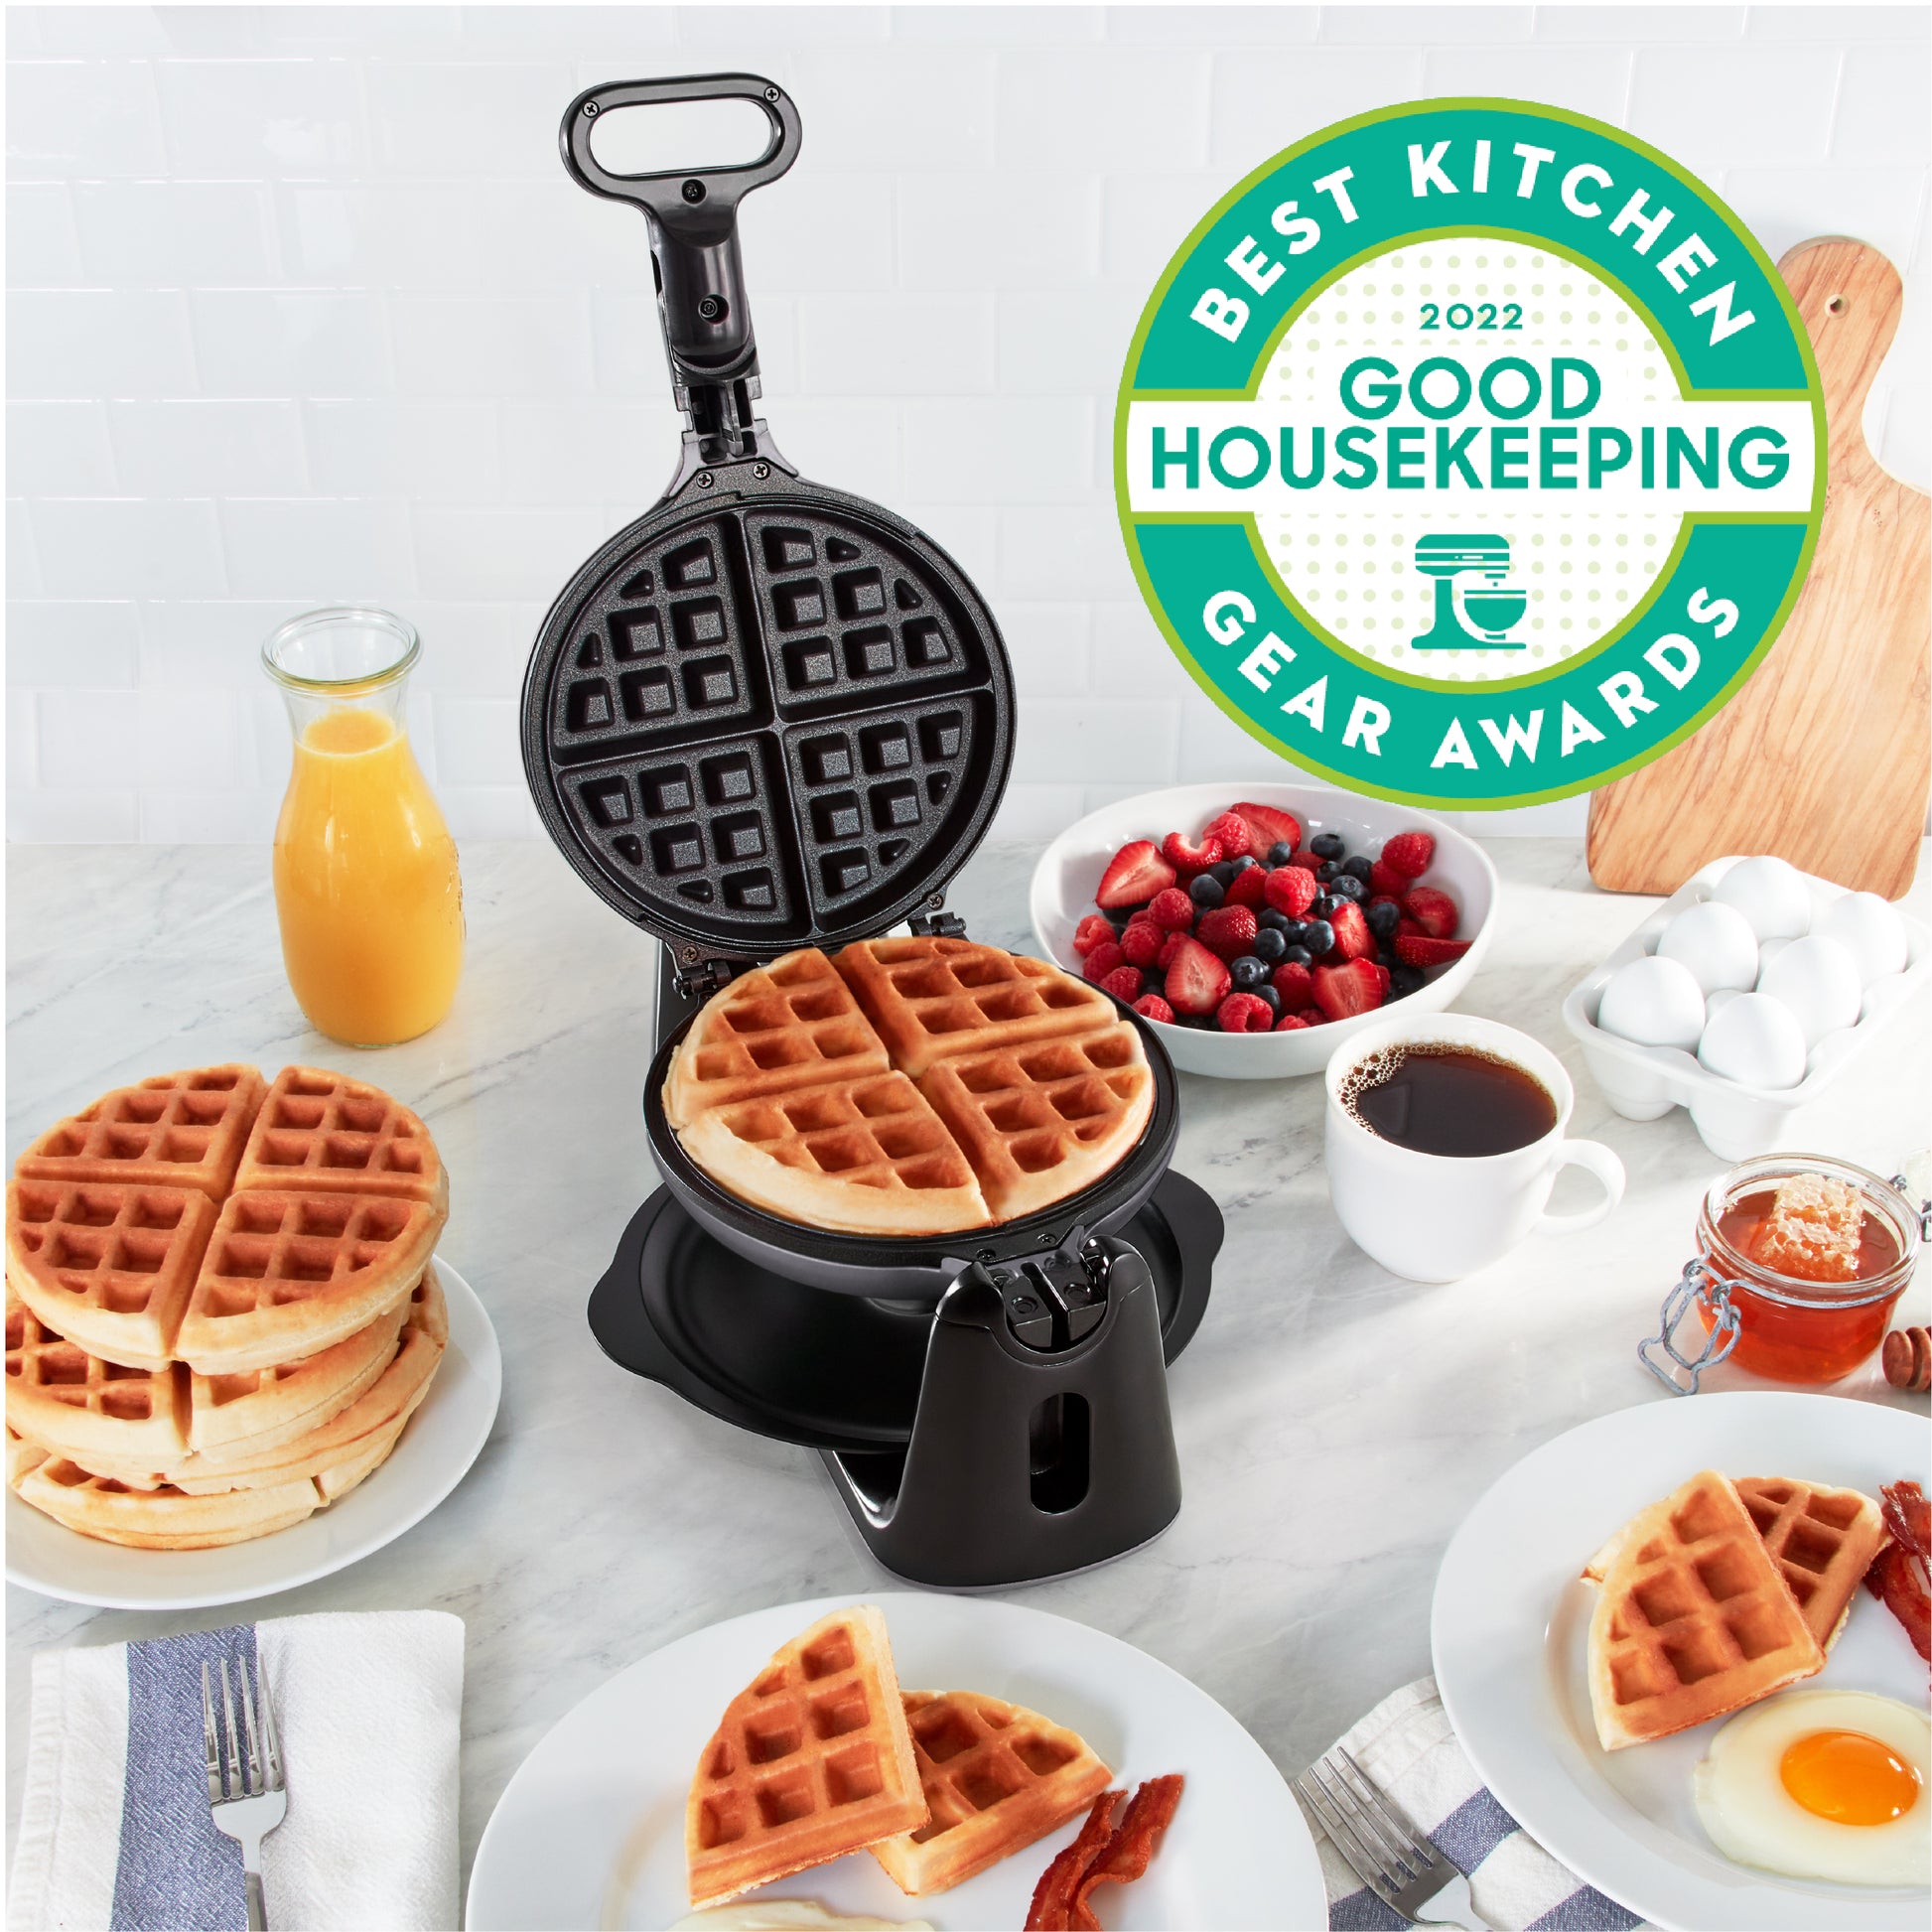 7 Foods You Can Cook in a Waffle Iron That Aren't Waffles